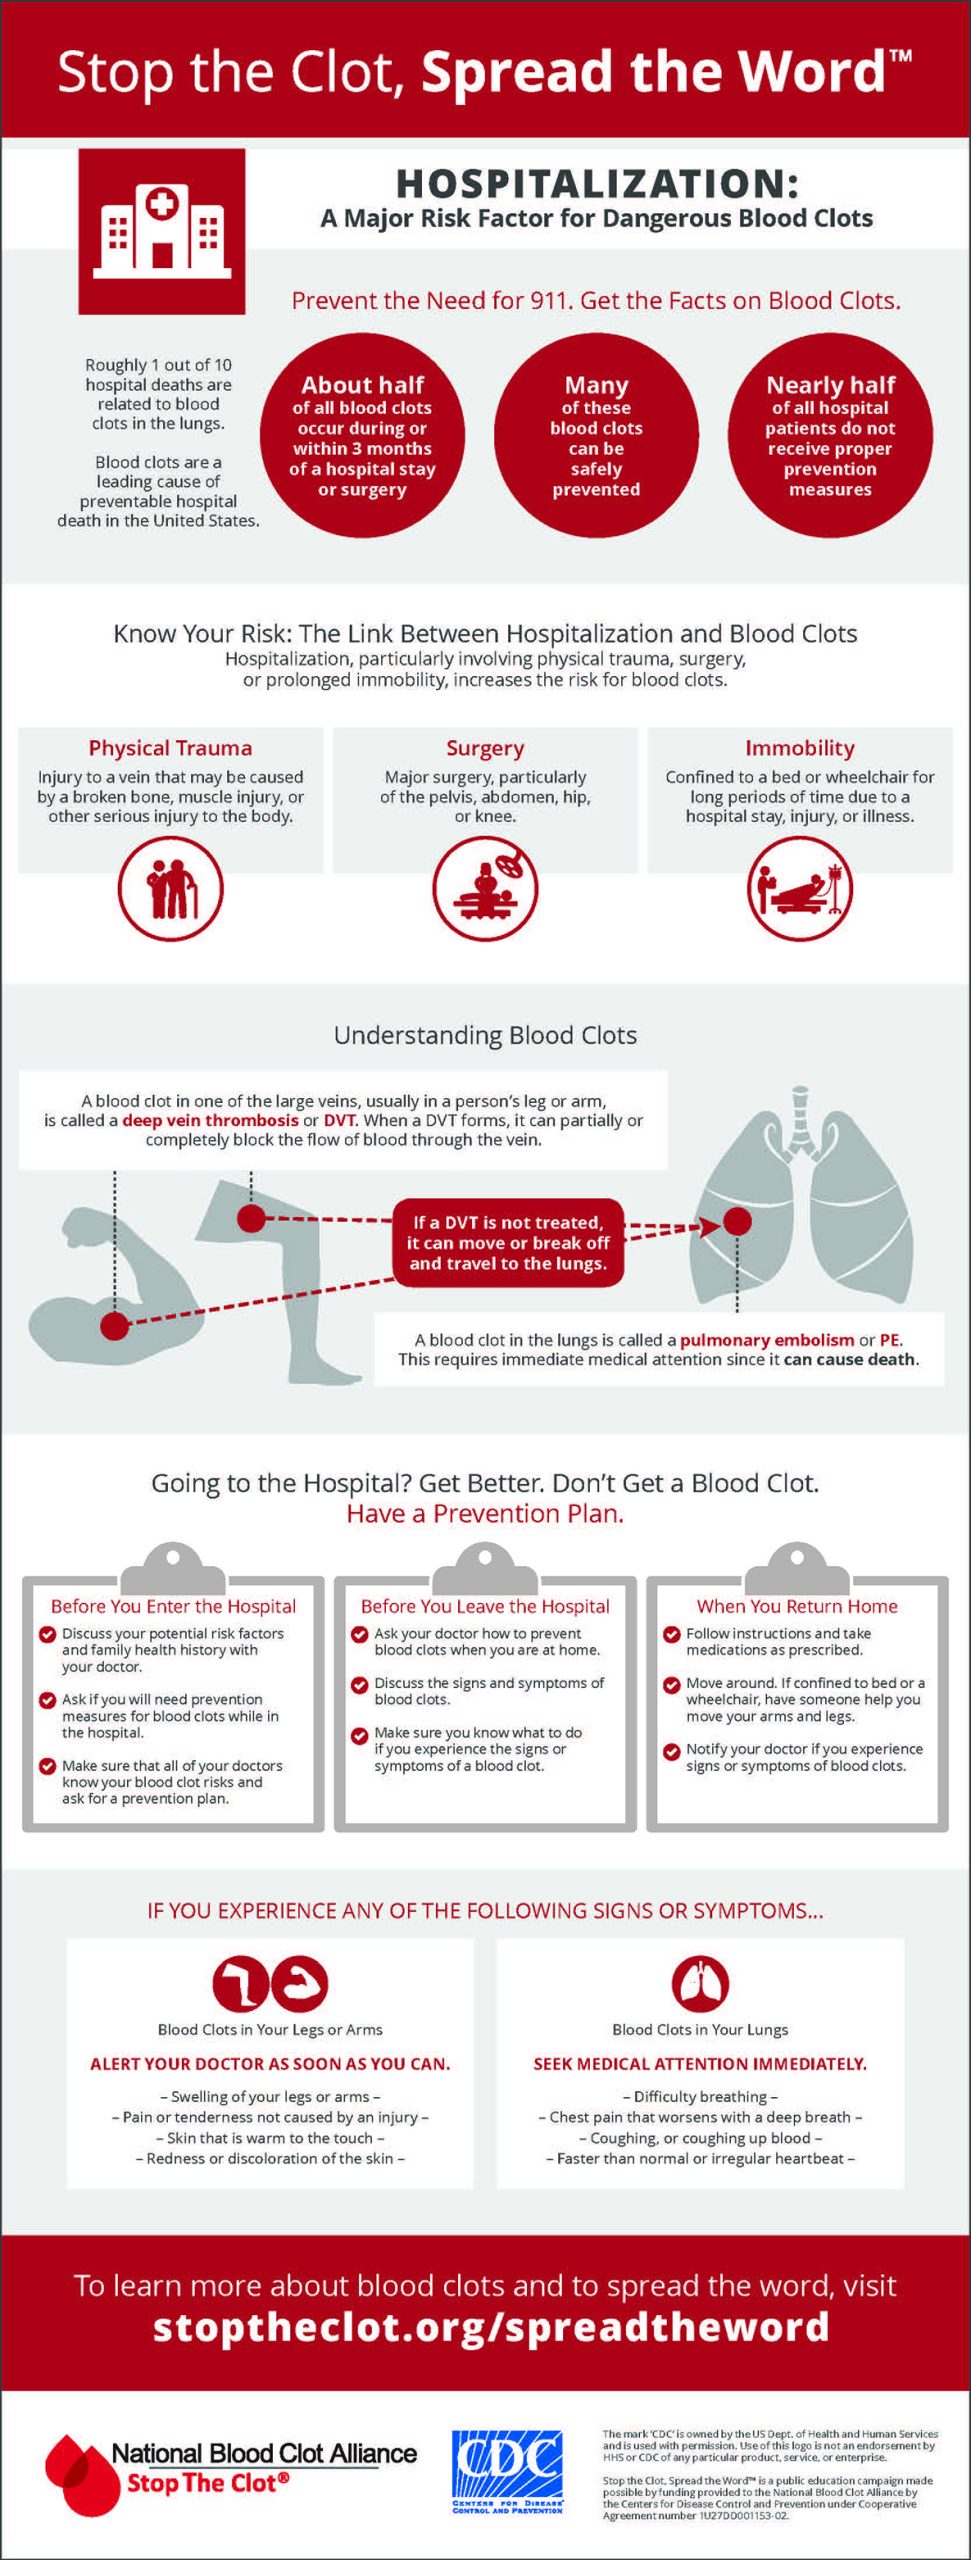 Infographic showing risks for blood clots with hospitalization, details below.